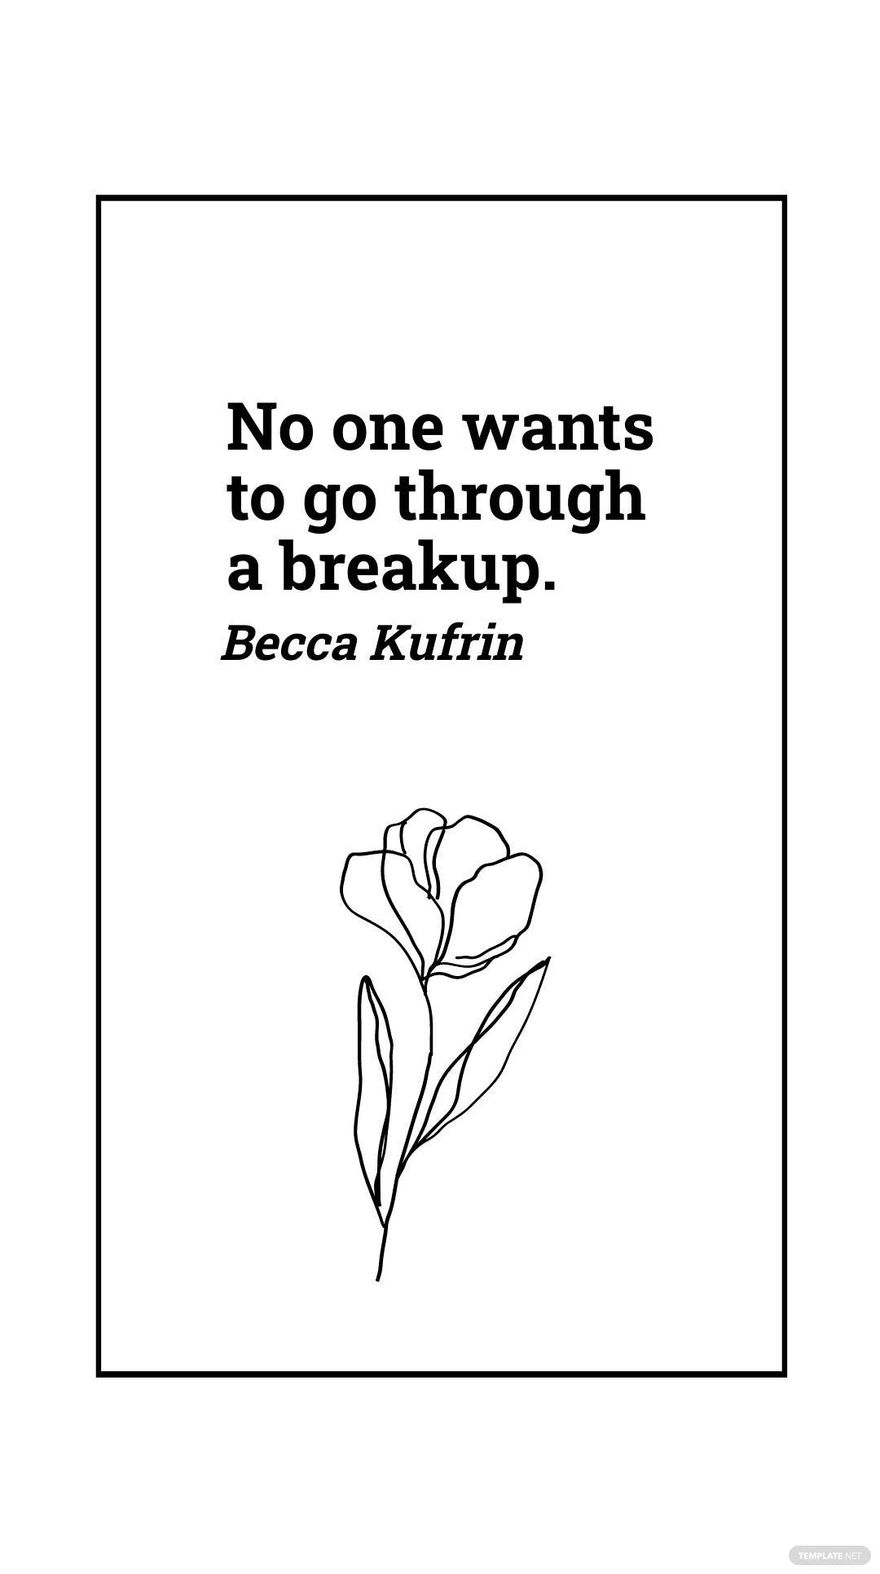 Becca Kufrin - No one wants to go through a breakup.